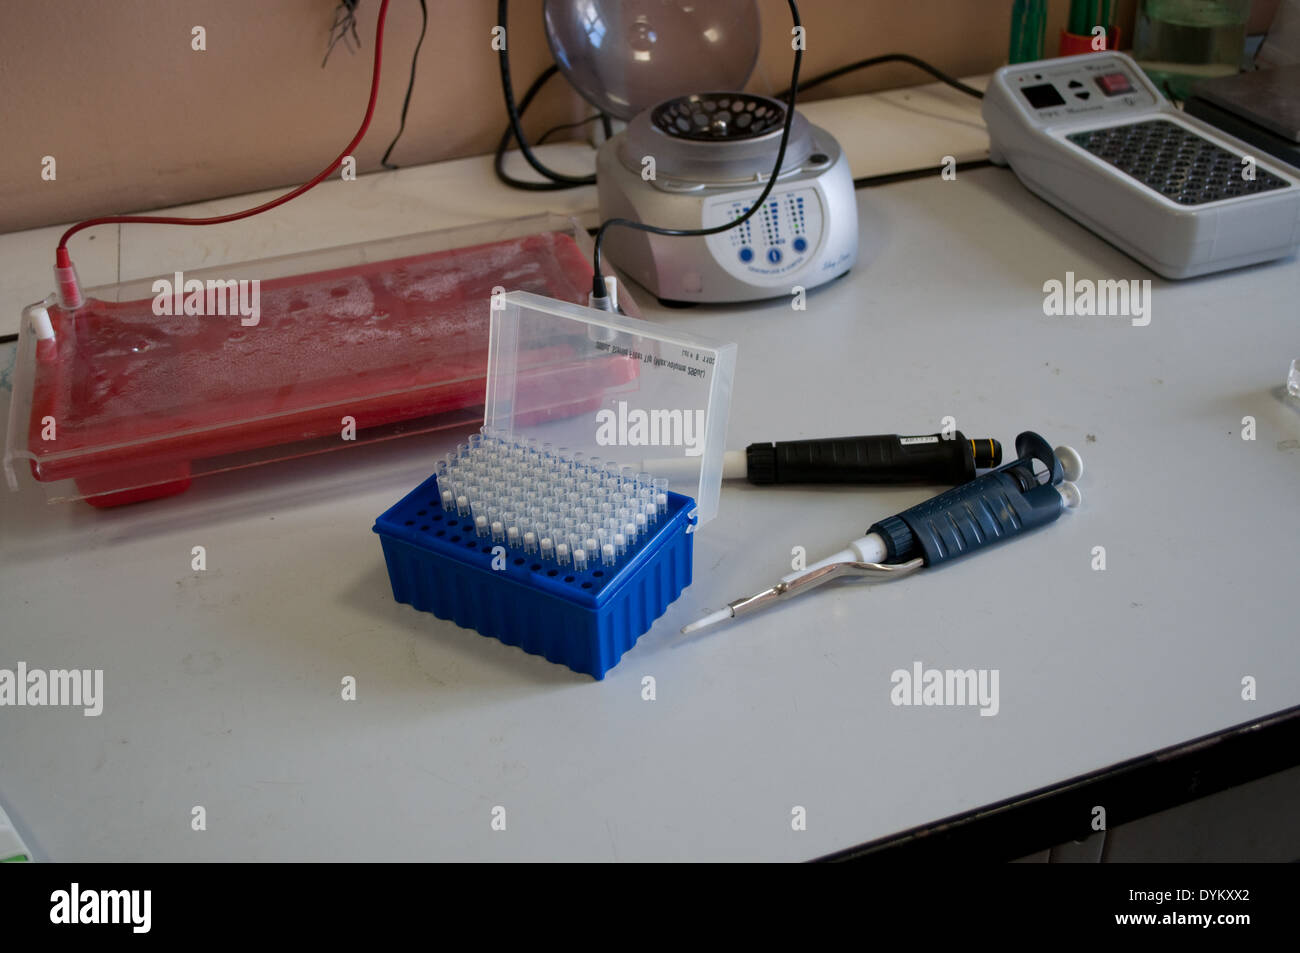 Desk in the biological laboratory. Equipment and facilities for scientific experiments. Stock Photo